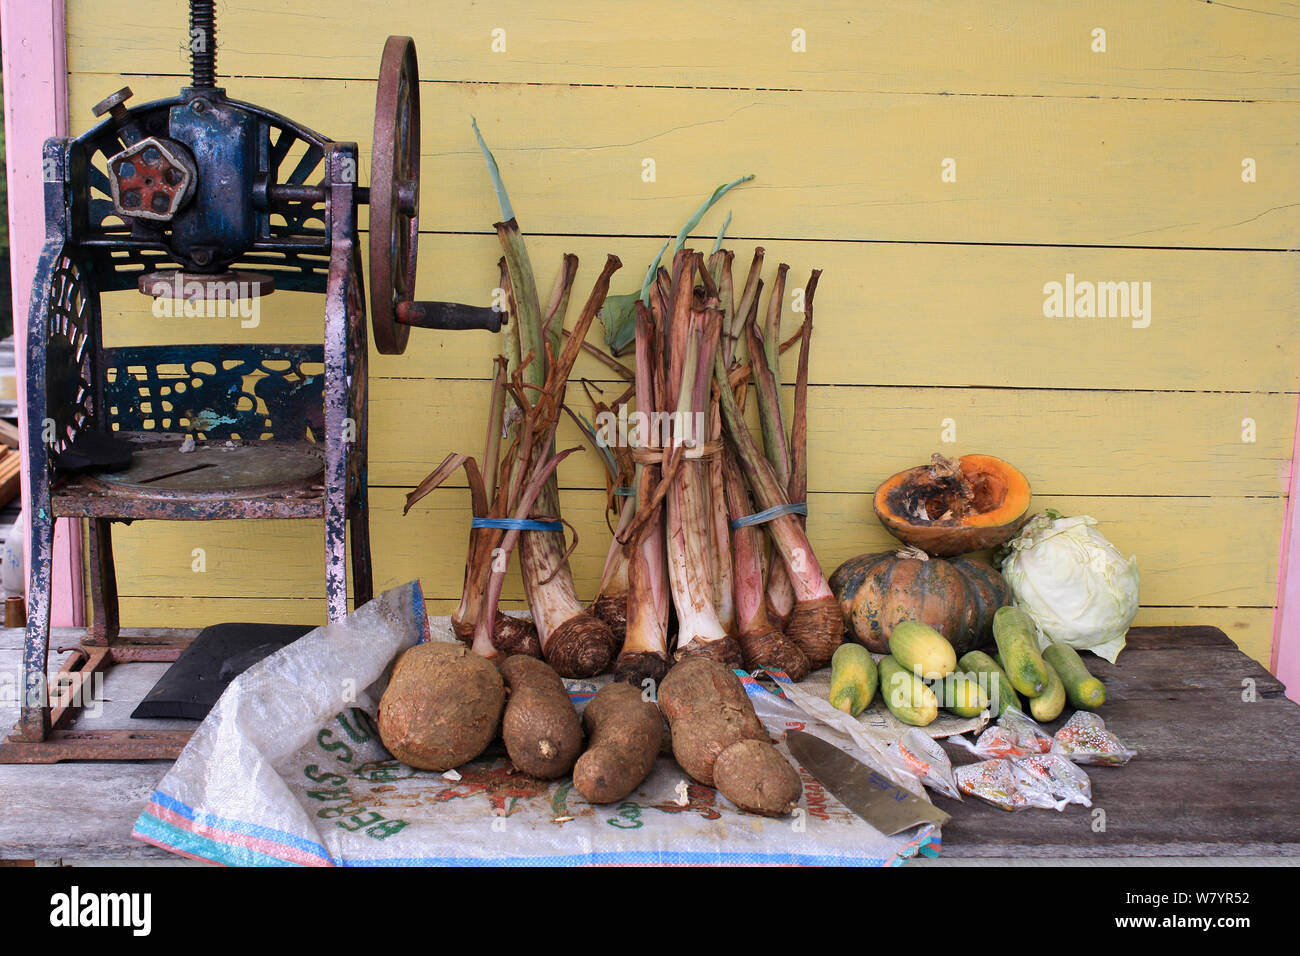 Farm produce outside house with yam, casava and pumpkins, with sugar cane press. Gunung Palung National Park, West Kalimantan, Indonesian Borneo. July 2010. Stock Photo